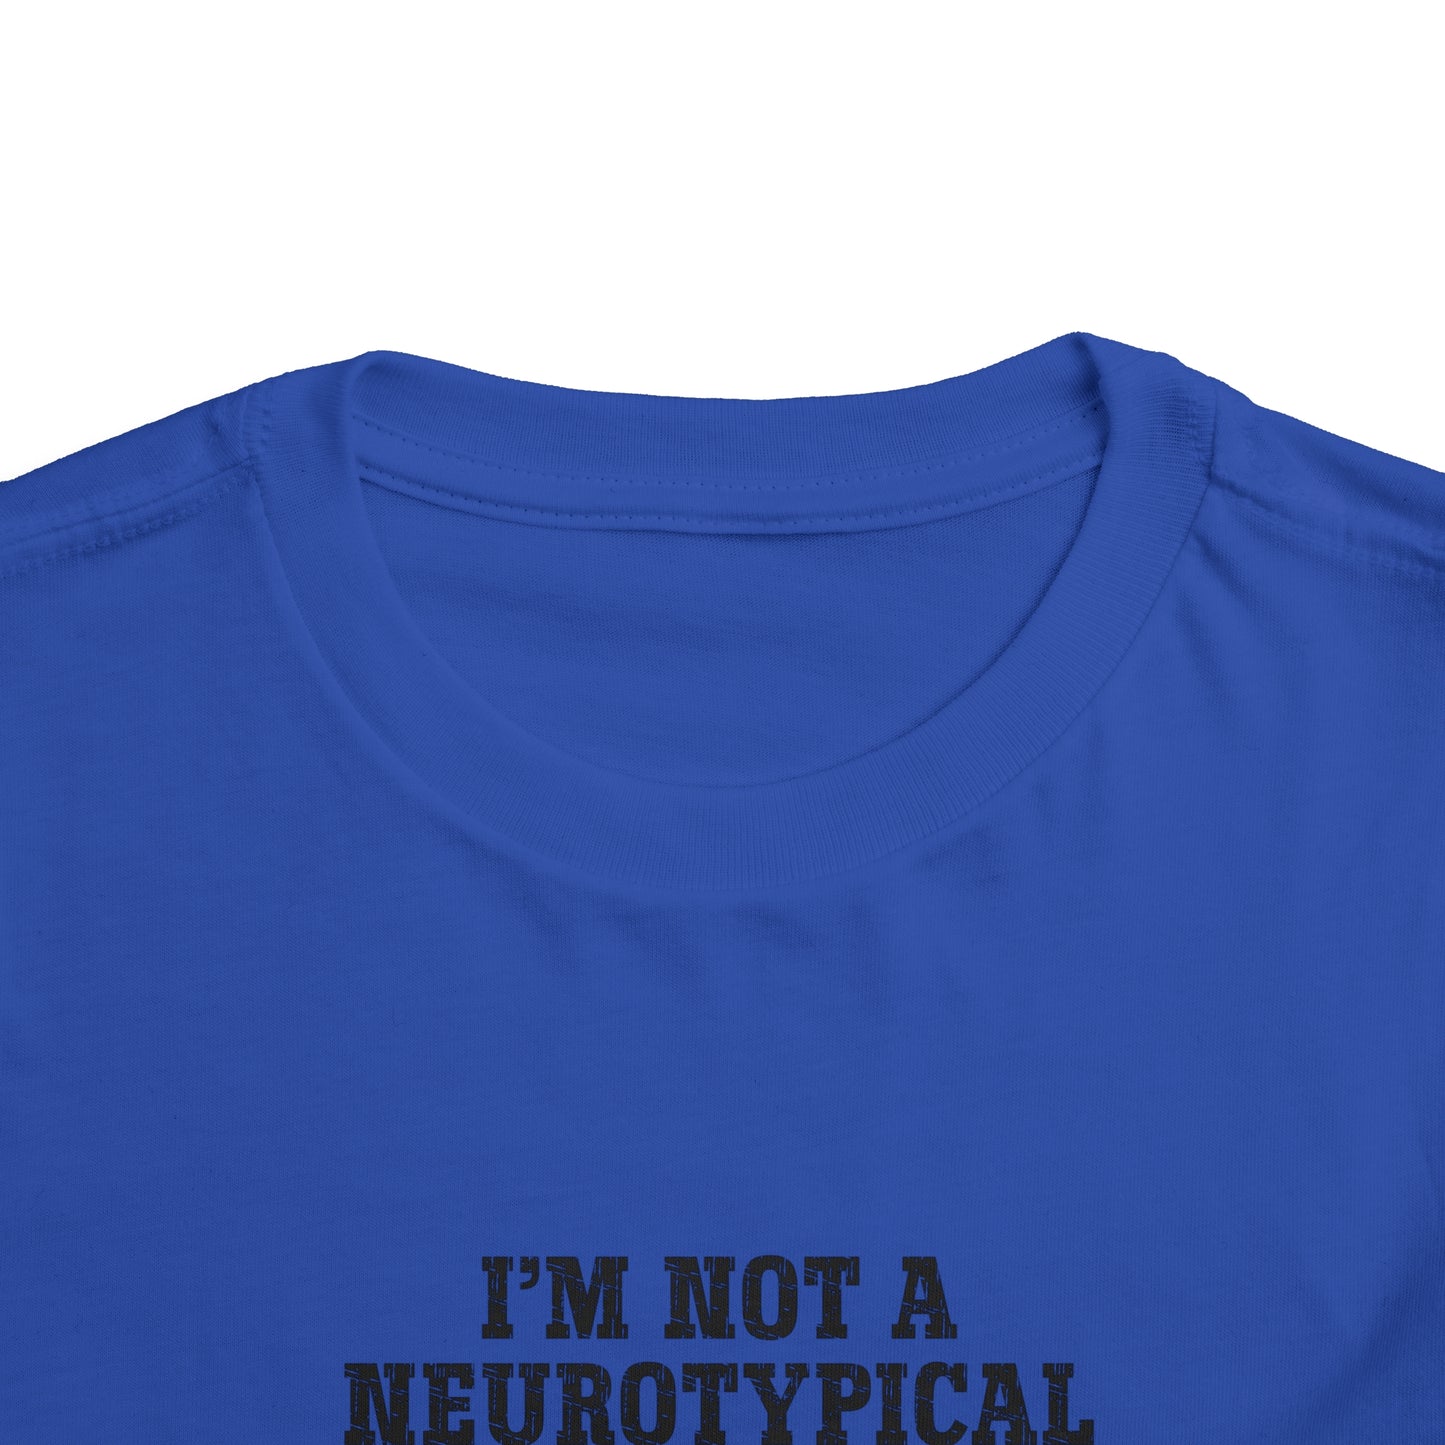 Not a Nuerotypical kid, much cooler Autism Toddler Short Sleeve Tee